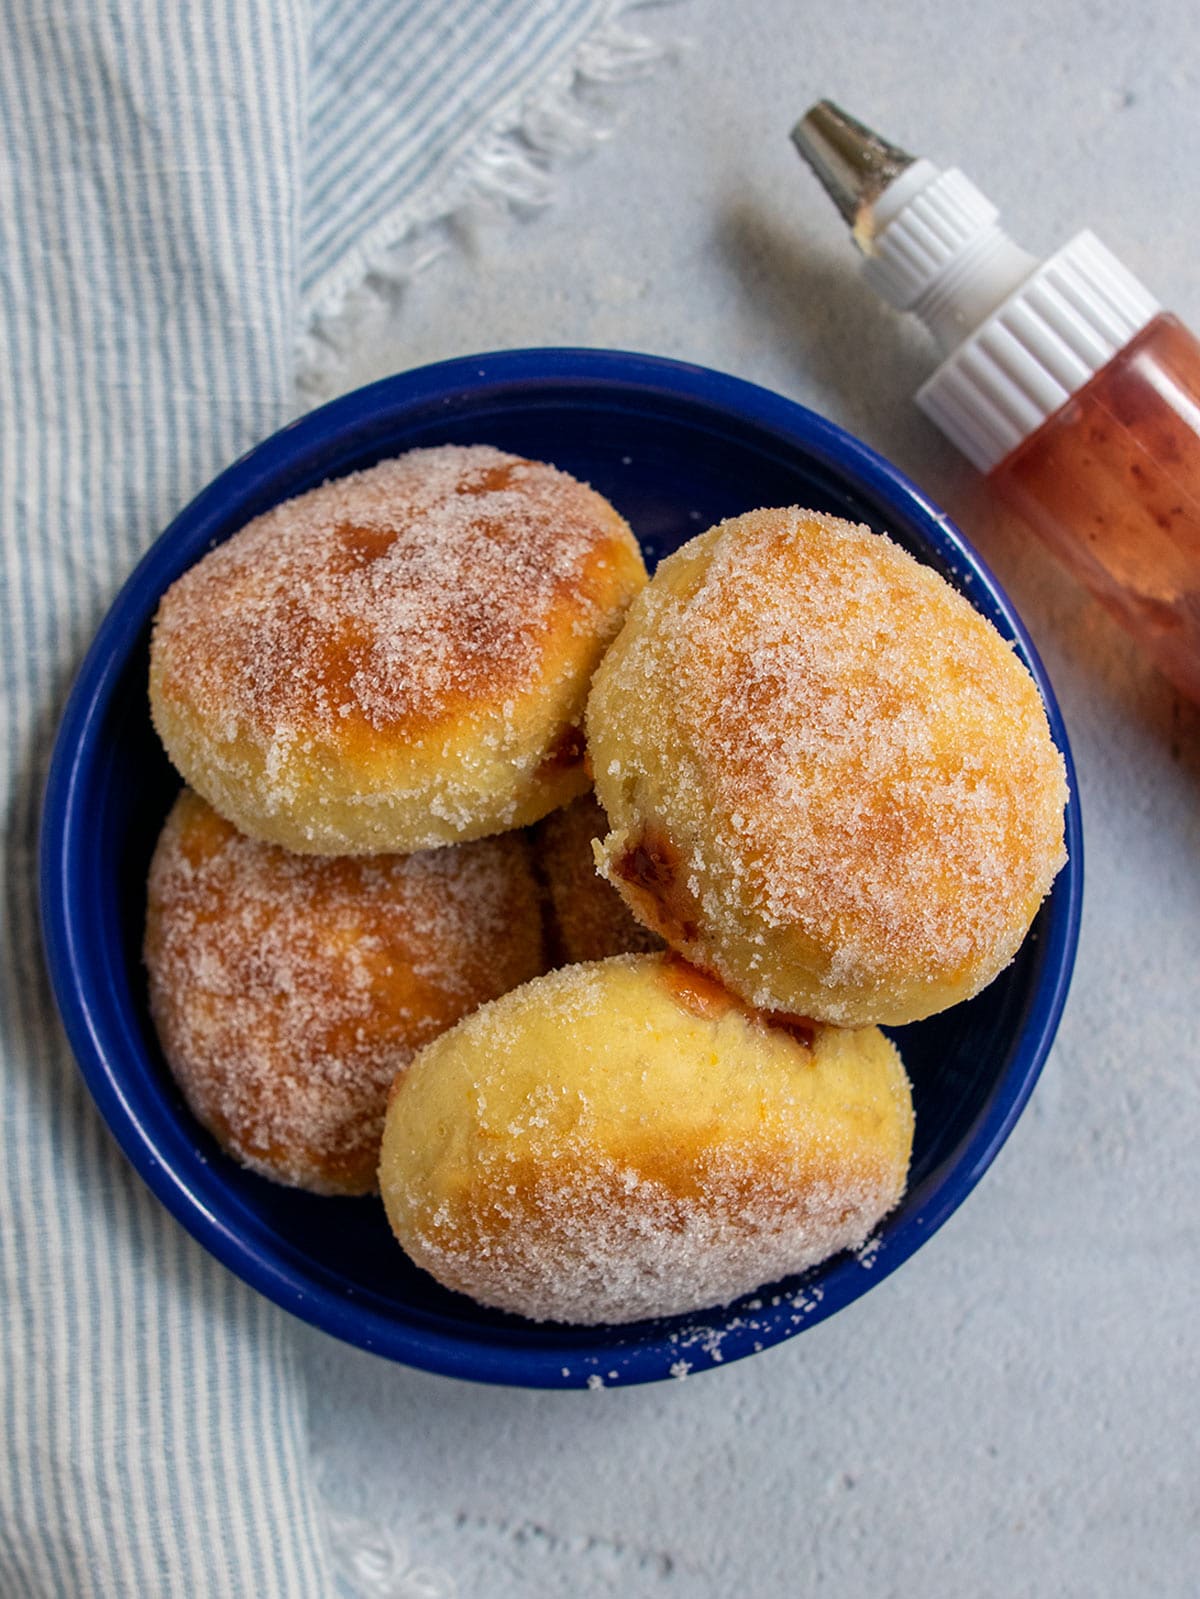 Baked sufganiyot in a blue bowl with a jam squeeze jar on the side.